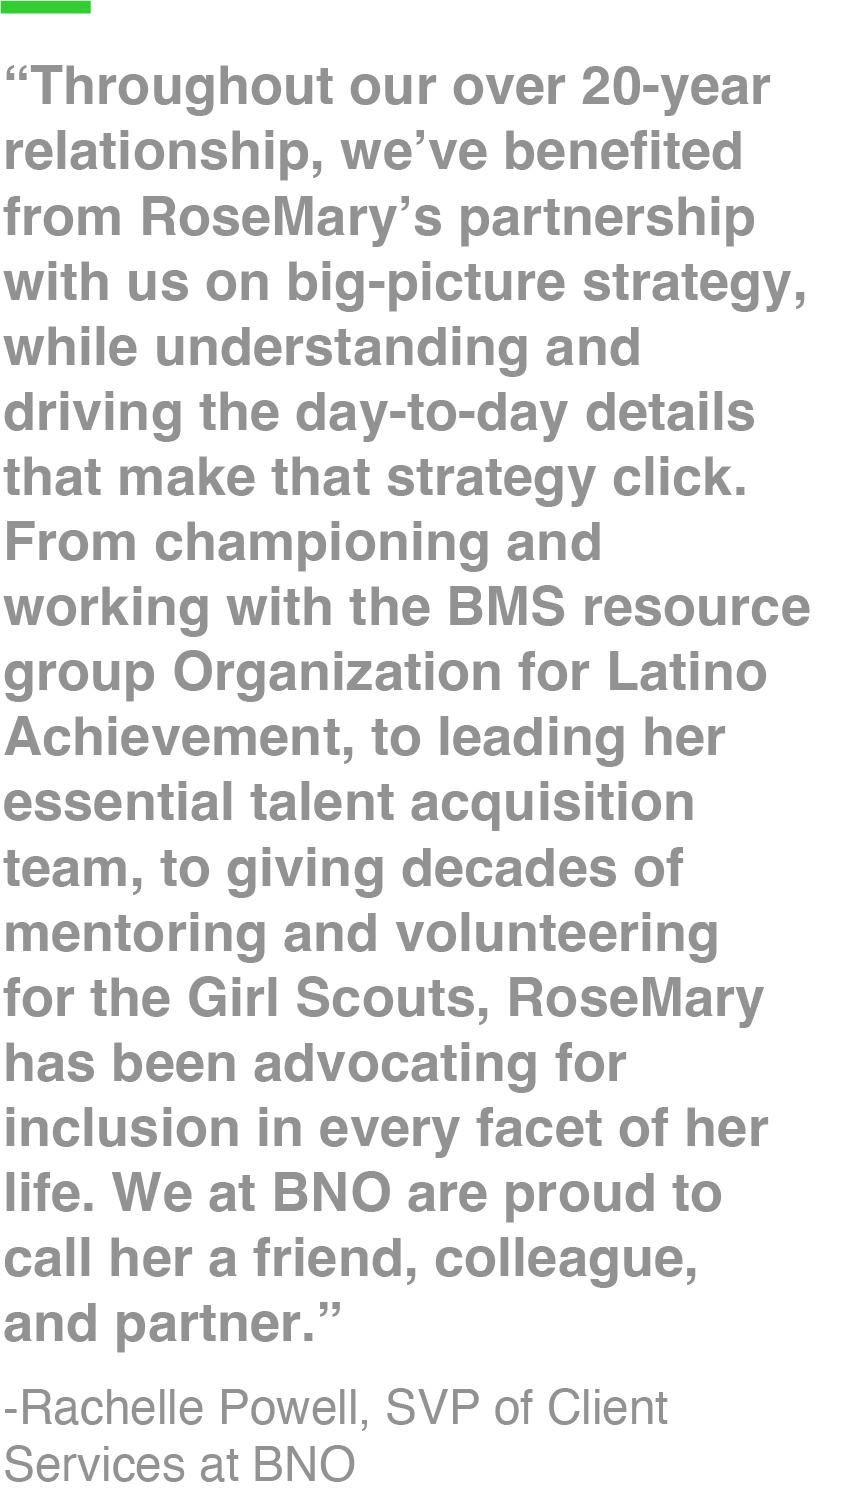 “Throughout our over 20-year relationship, we’ve benefited from RoseMary’s partnership with us on big-picture strategy, while understanding and driving the day-to-day details that make that strategy click. From championing and working with the BMS resource group Organization for Latino Achievement, to leading her essential talent acquisition team, to giving decades of mentoring and volunteering for the Girl Scouts, RoseMary has been advocating for inclusion in every facet of her life. We at BNO are proud to call her a friend, colleague, and partner.” -Rachelle Powell, SVP of Client Services at BNO